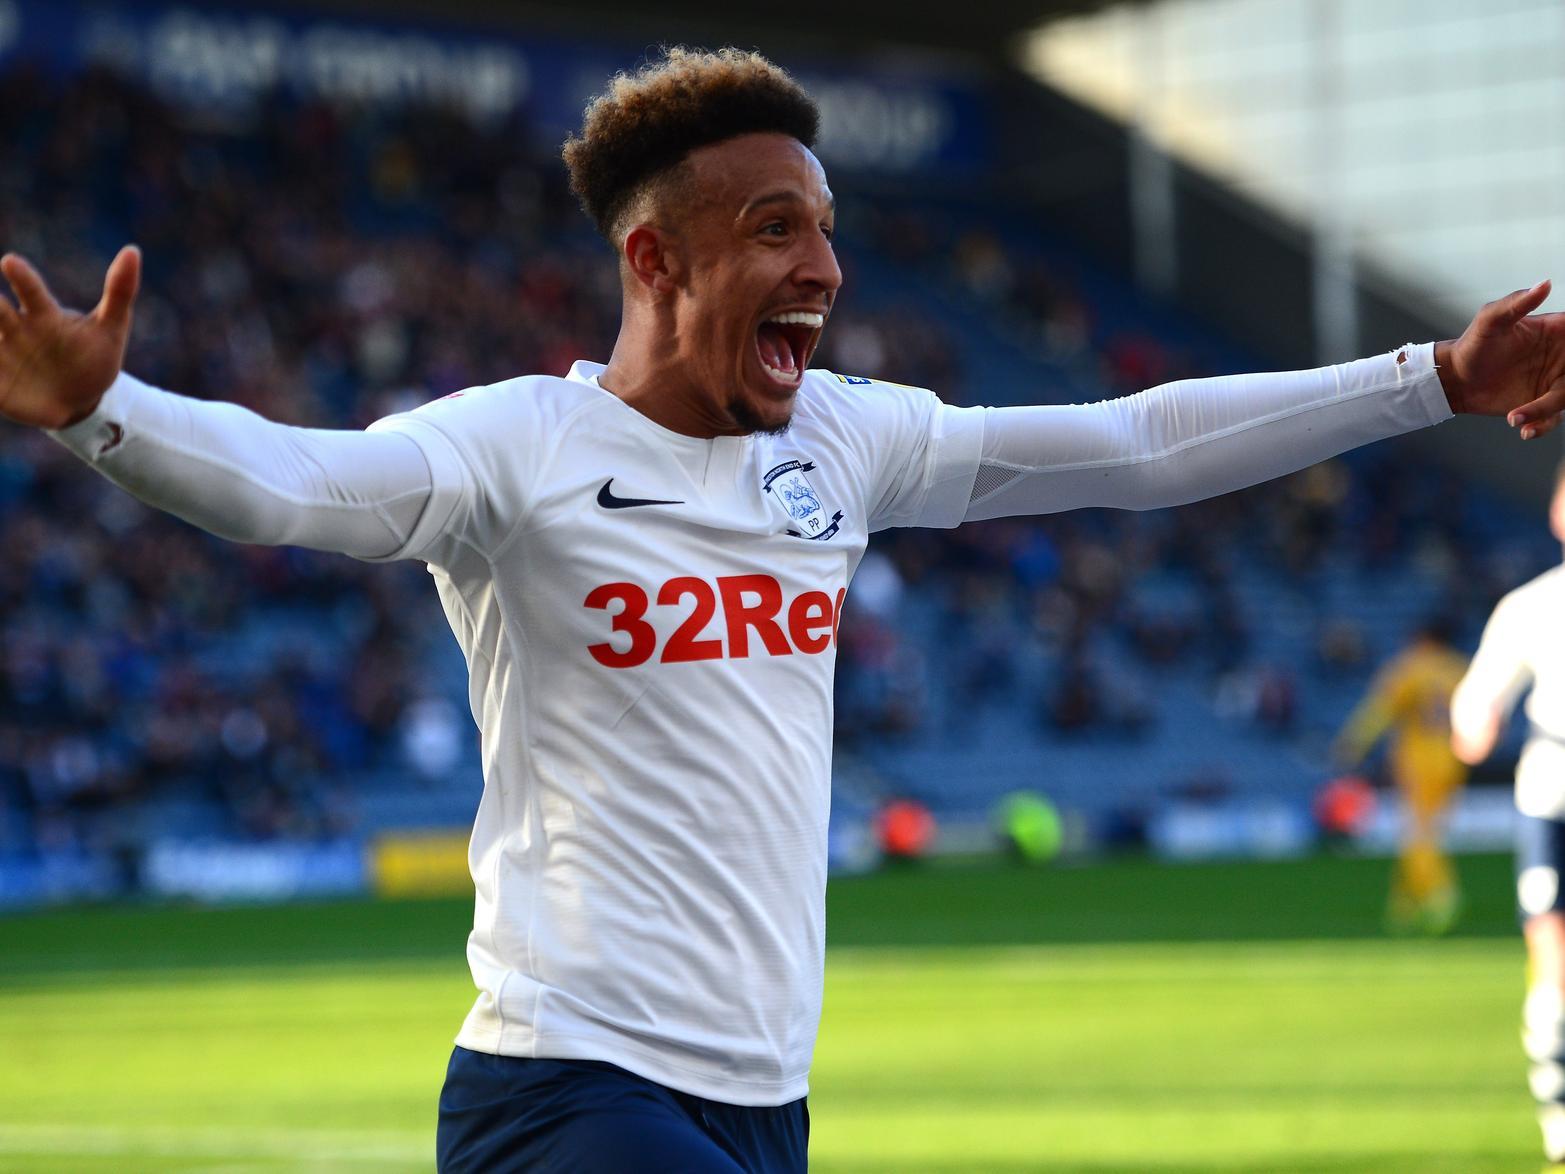 Developed massively during his time at PNE and left as one of the best forwards in the division. Could play all across the forward line and create something from nothing before being sold for 7m to Sheffield United in the summer.